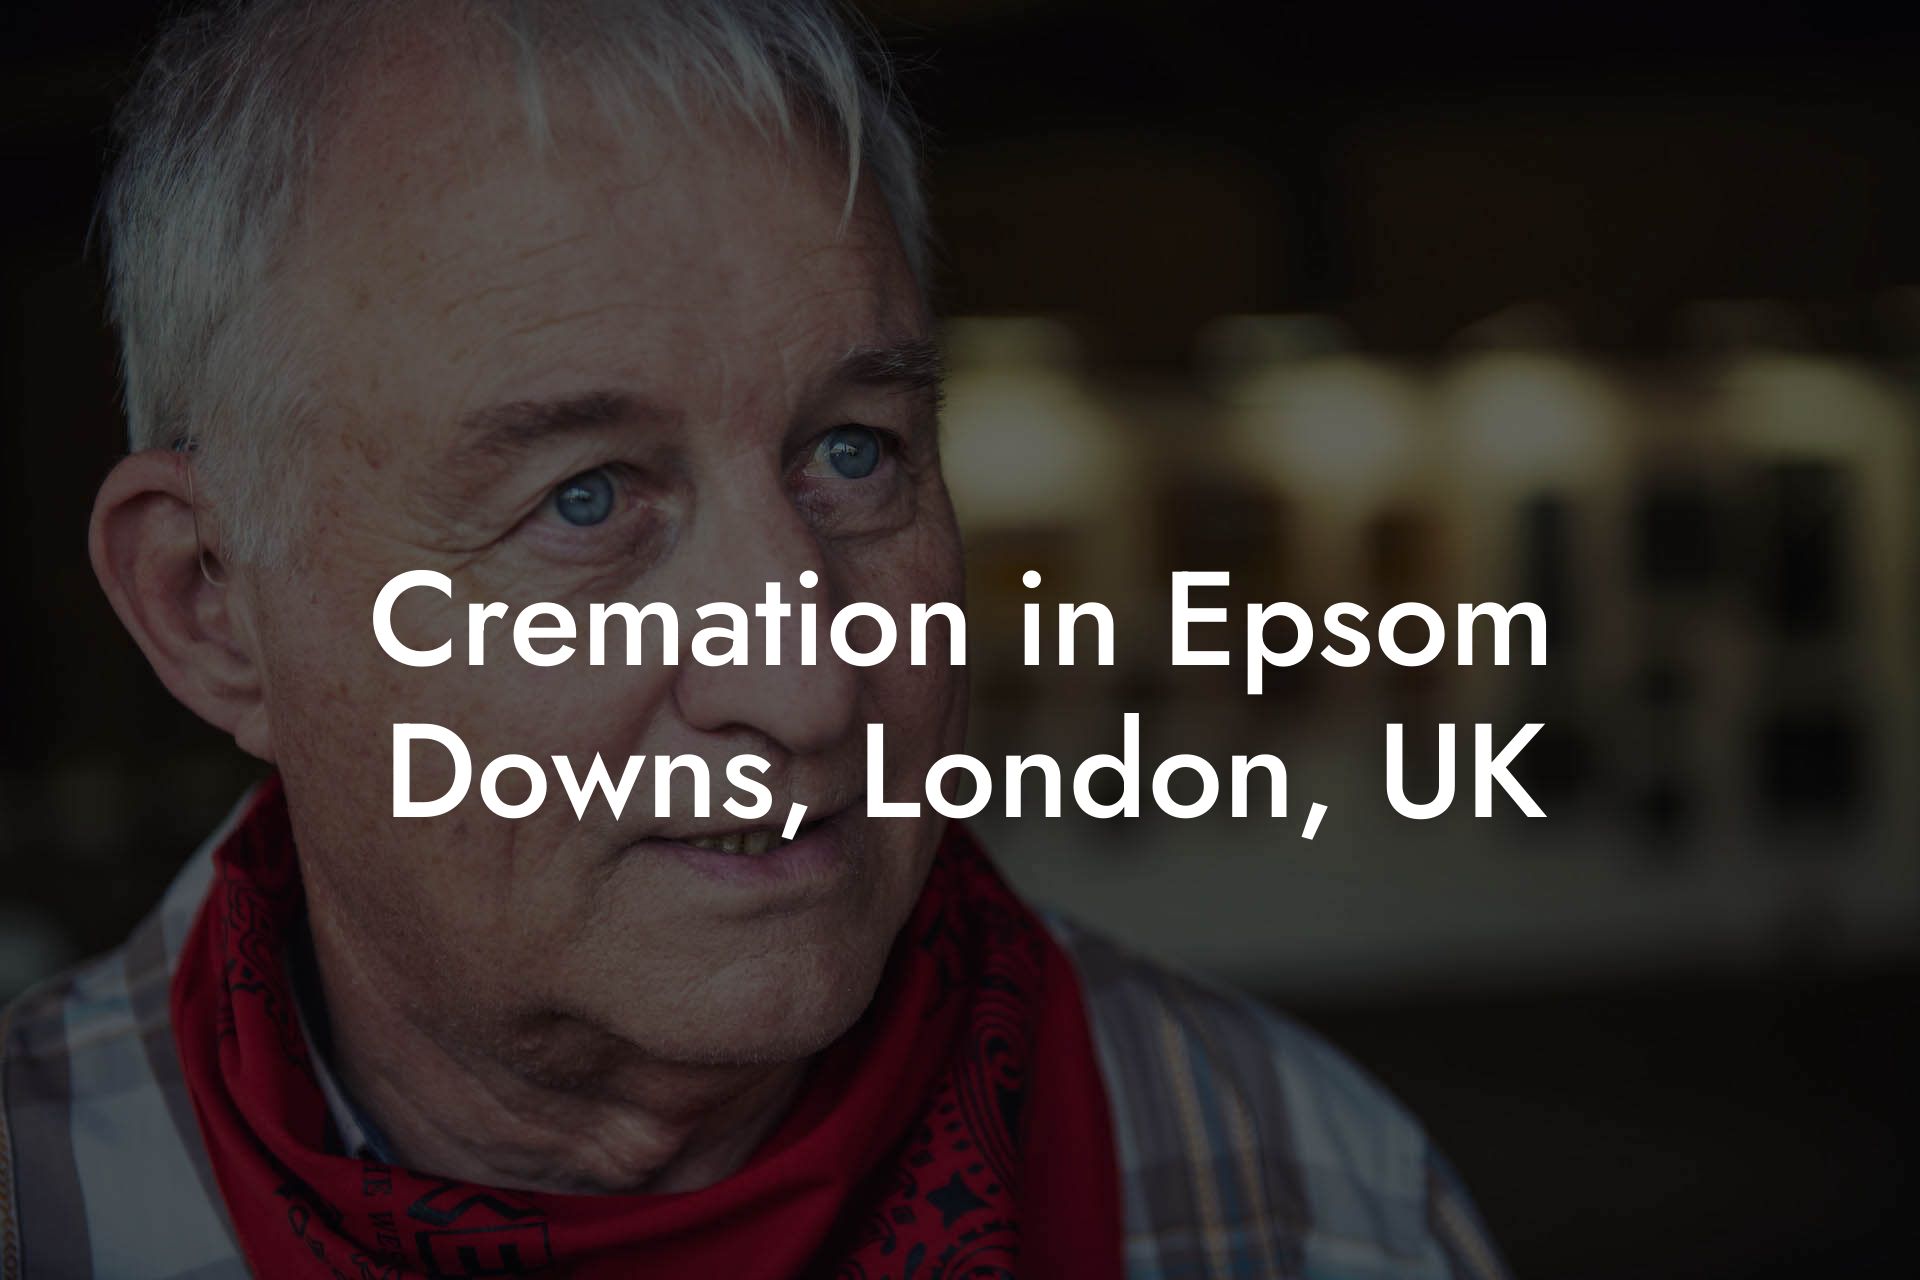 Cremation in Epsom Downs, London, UK